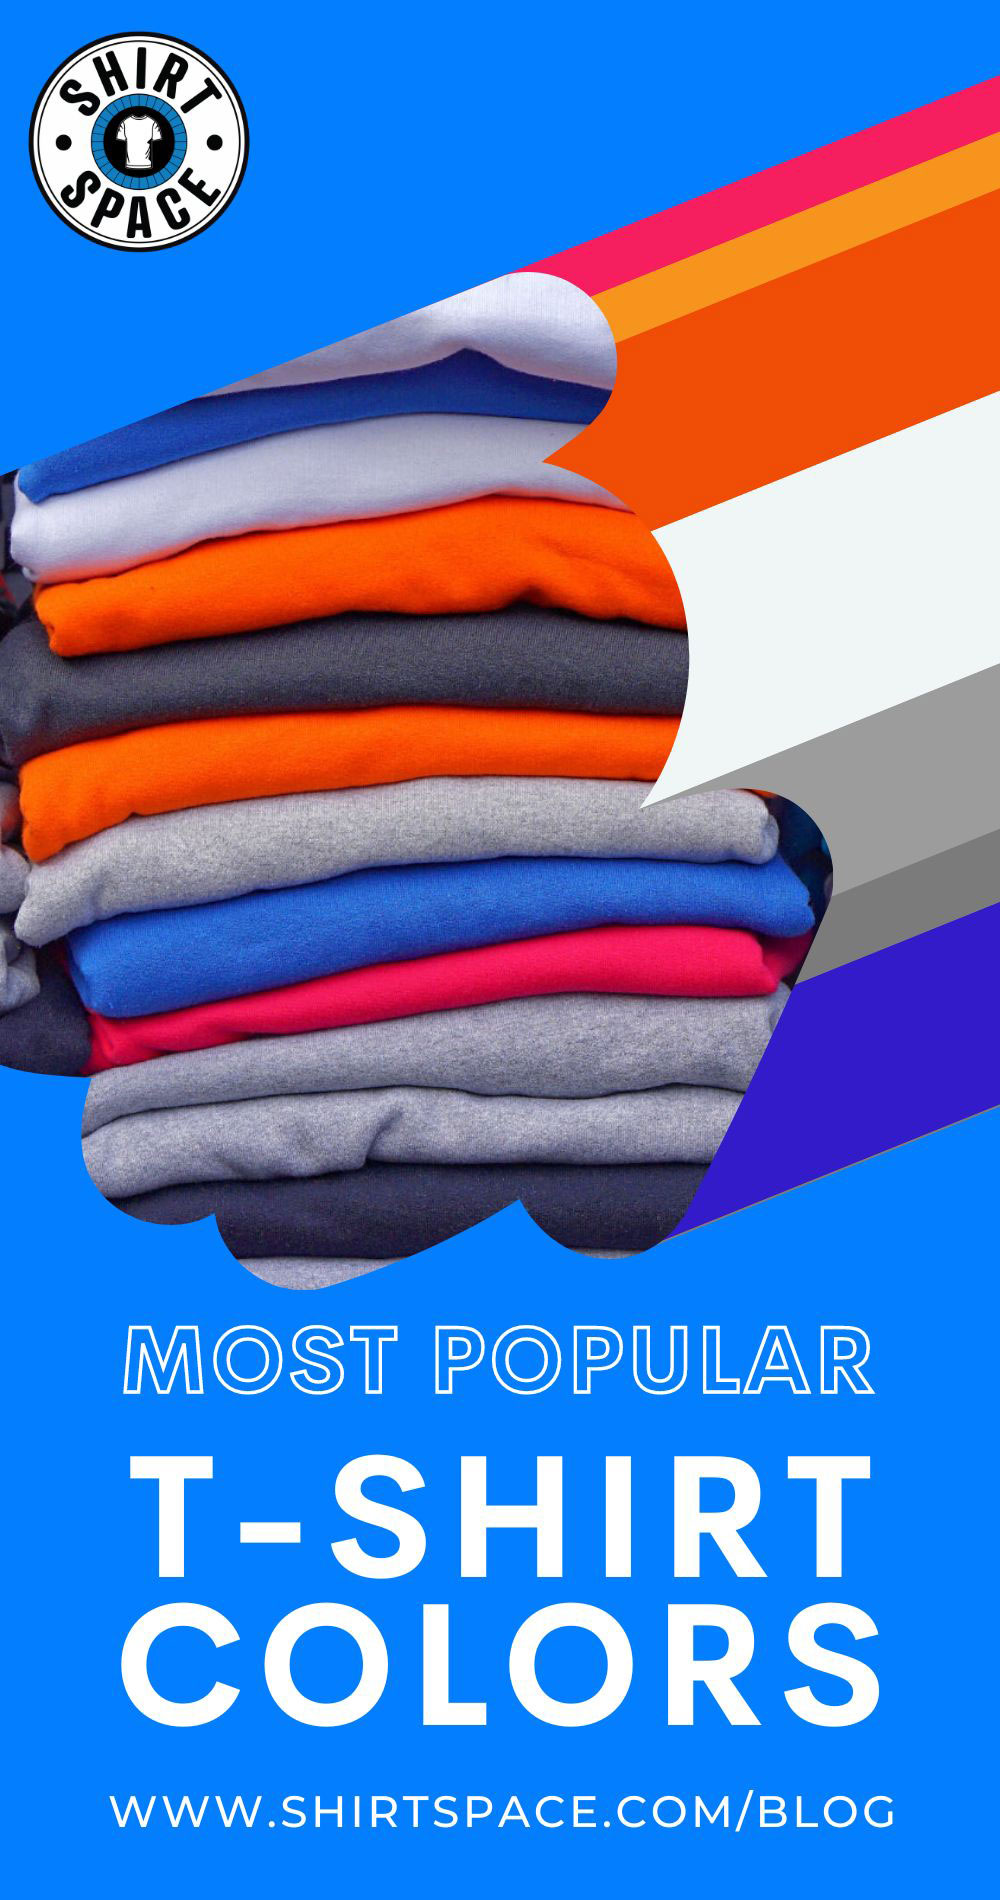 Most popular t-shirt colors Pinterest pin featuring a colorful stack of t-shirts. 